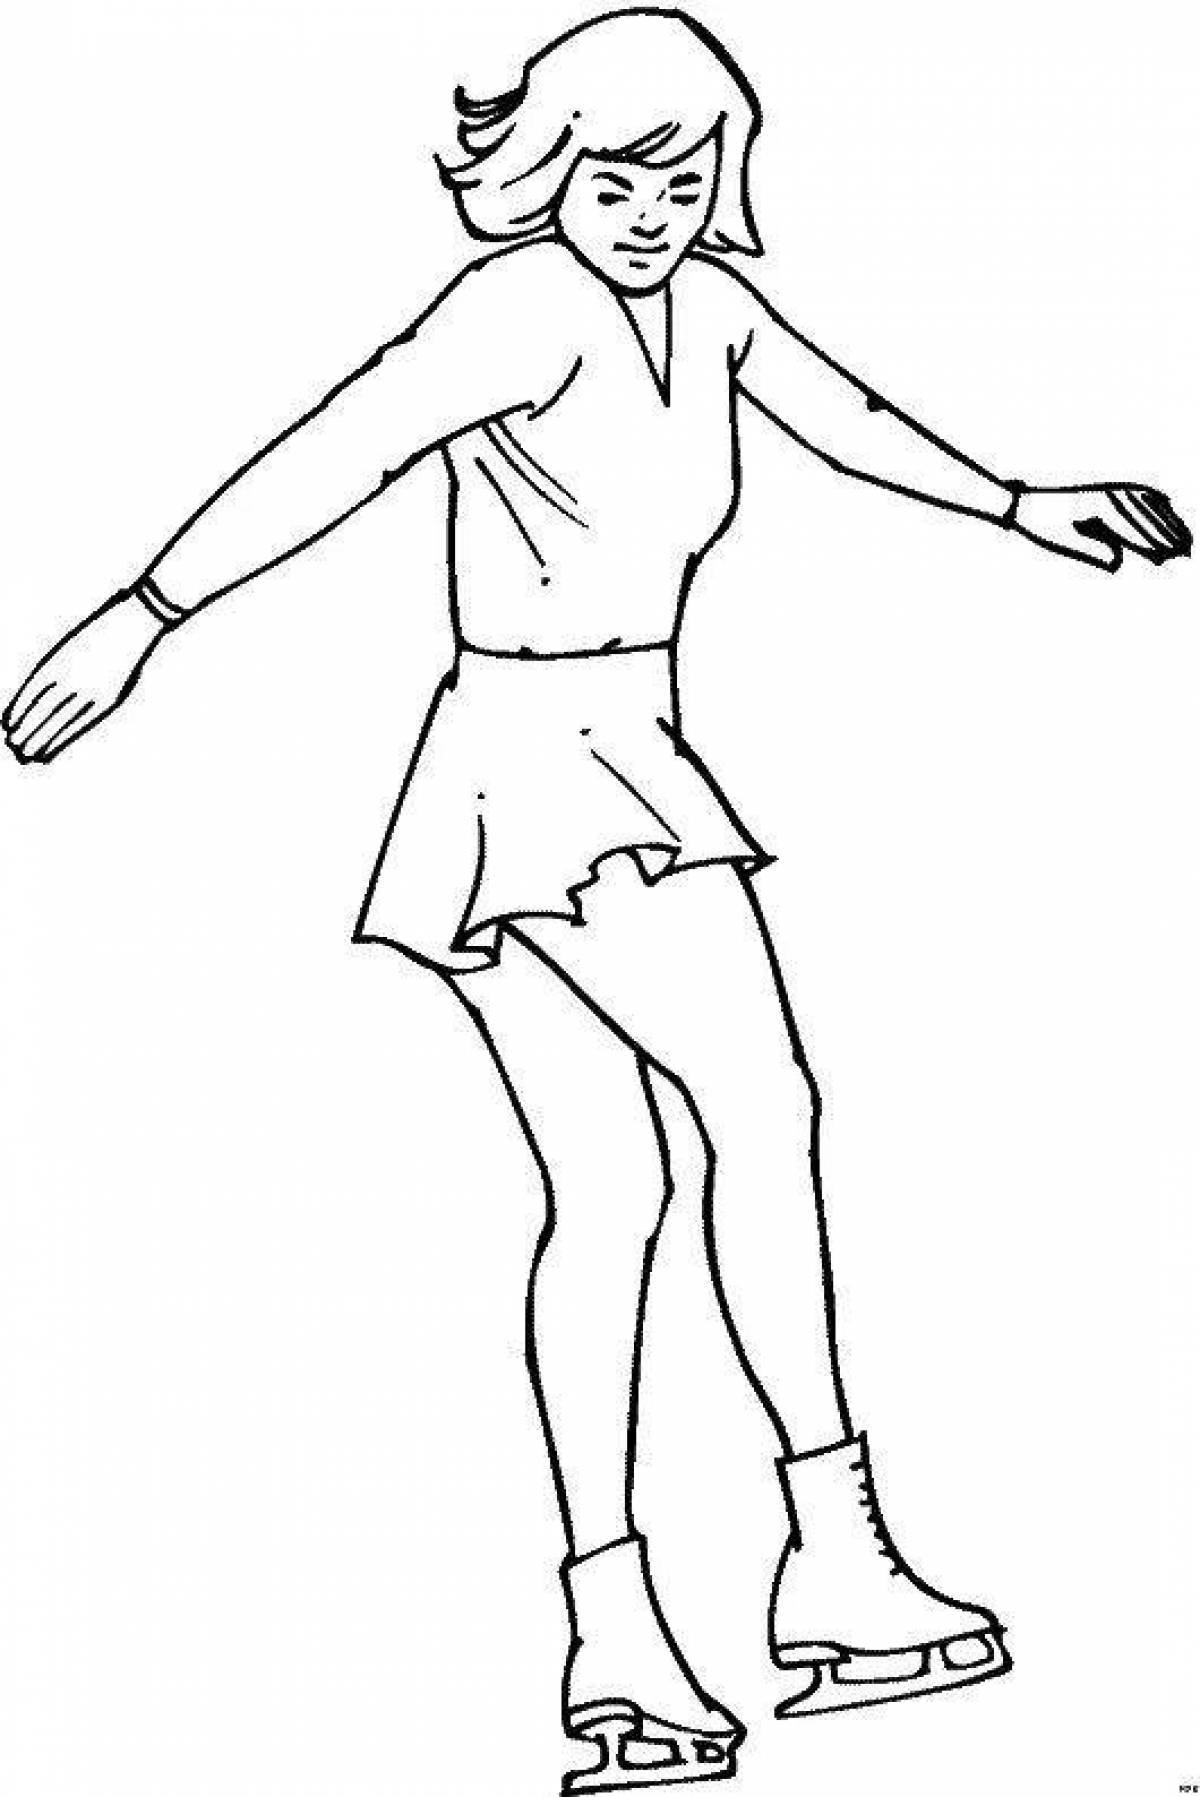 Outstanding figure skater coloring pages